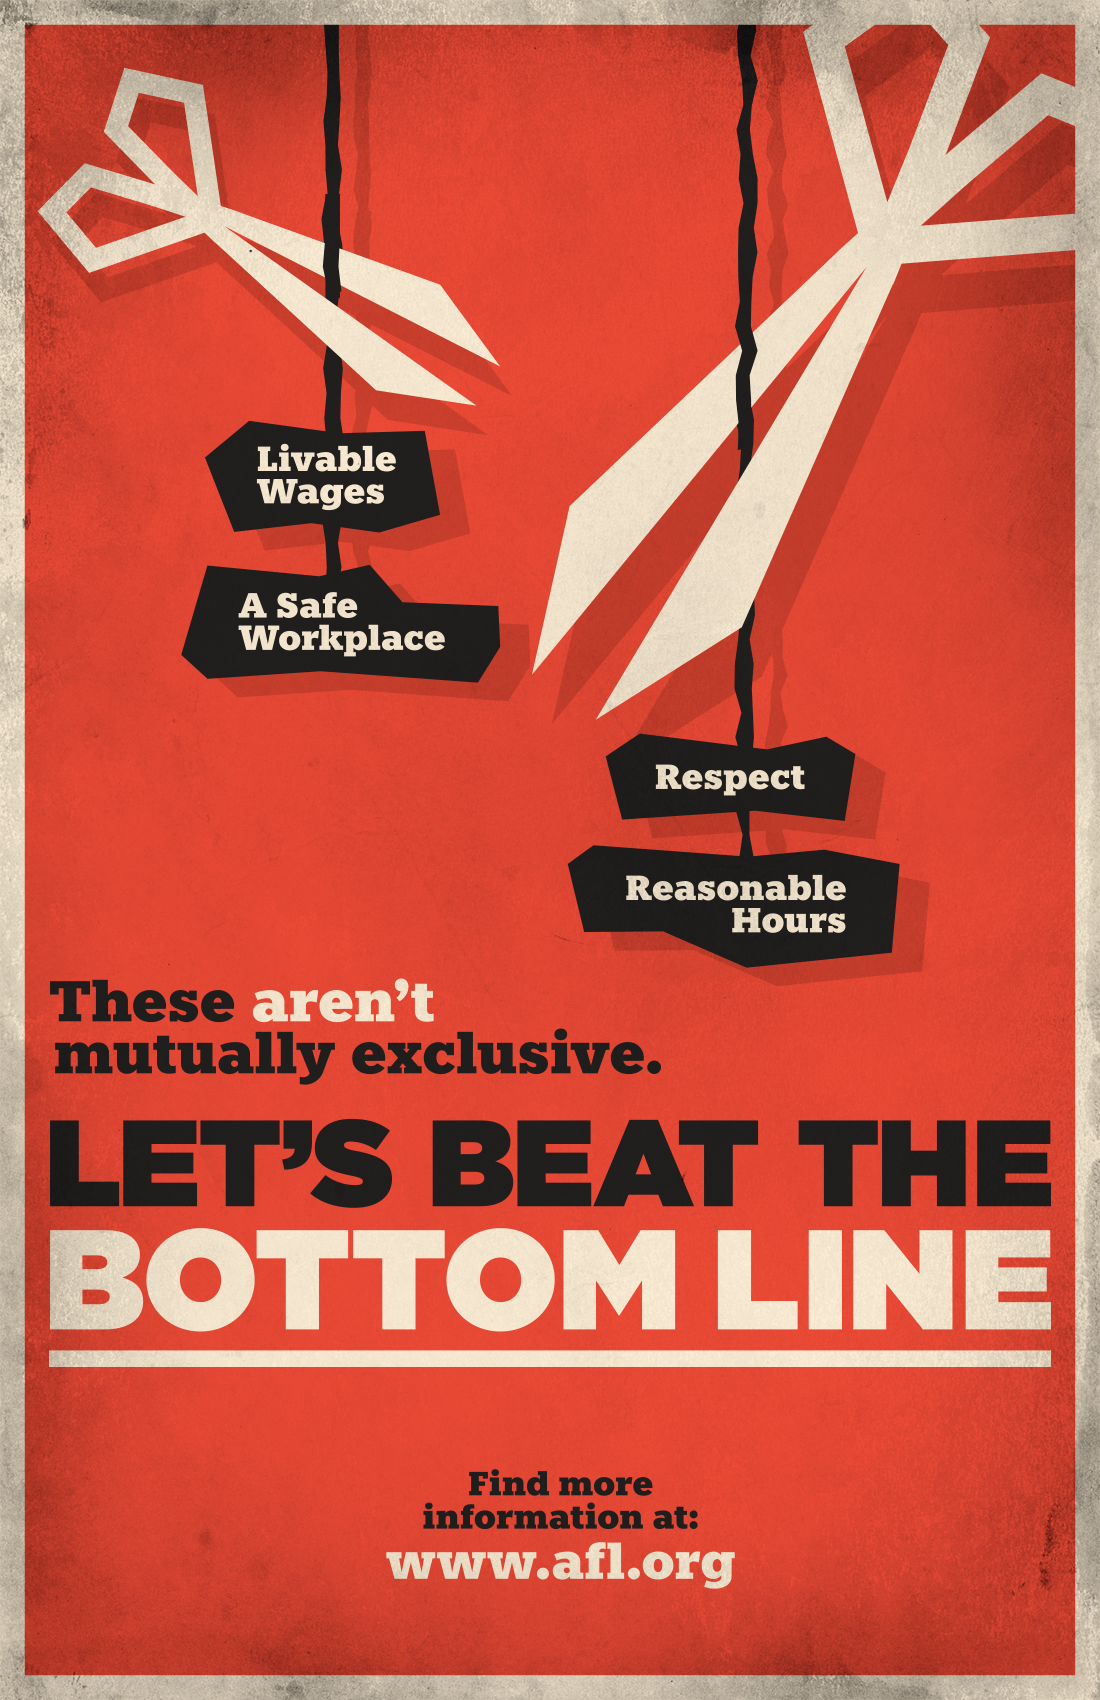 Beat the Bottom Line Campaign - Image 1